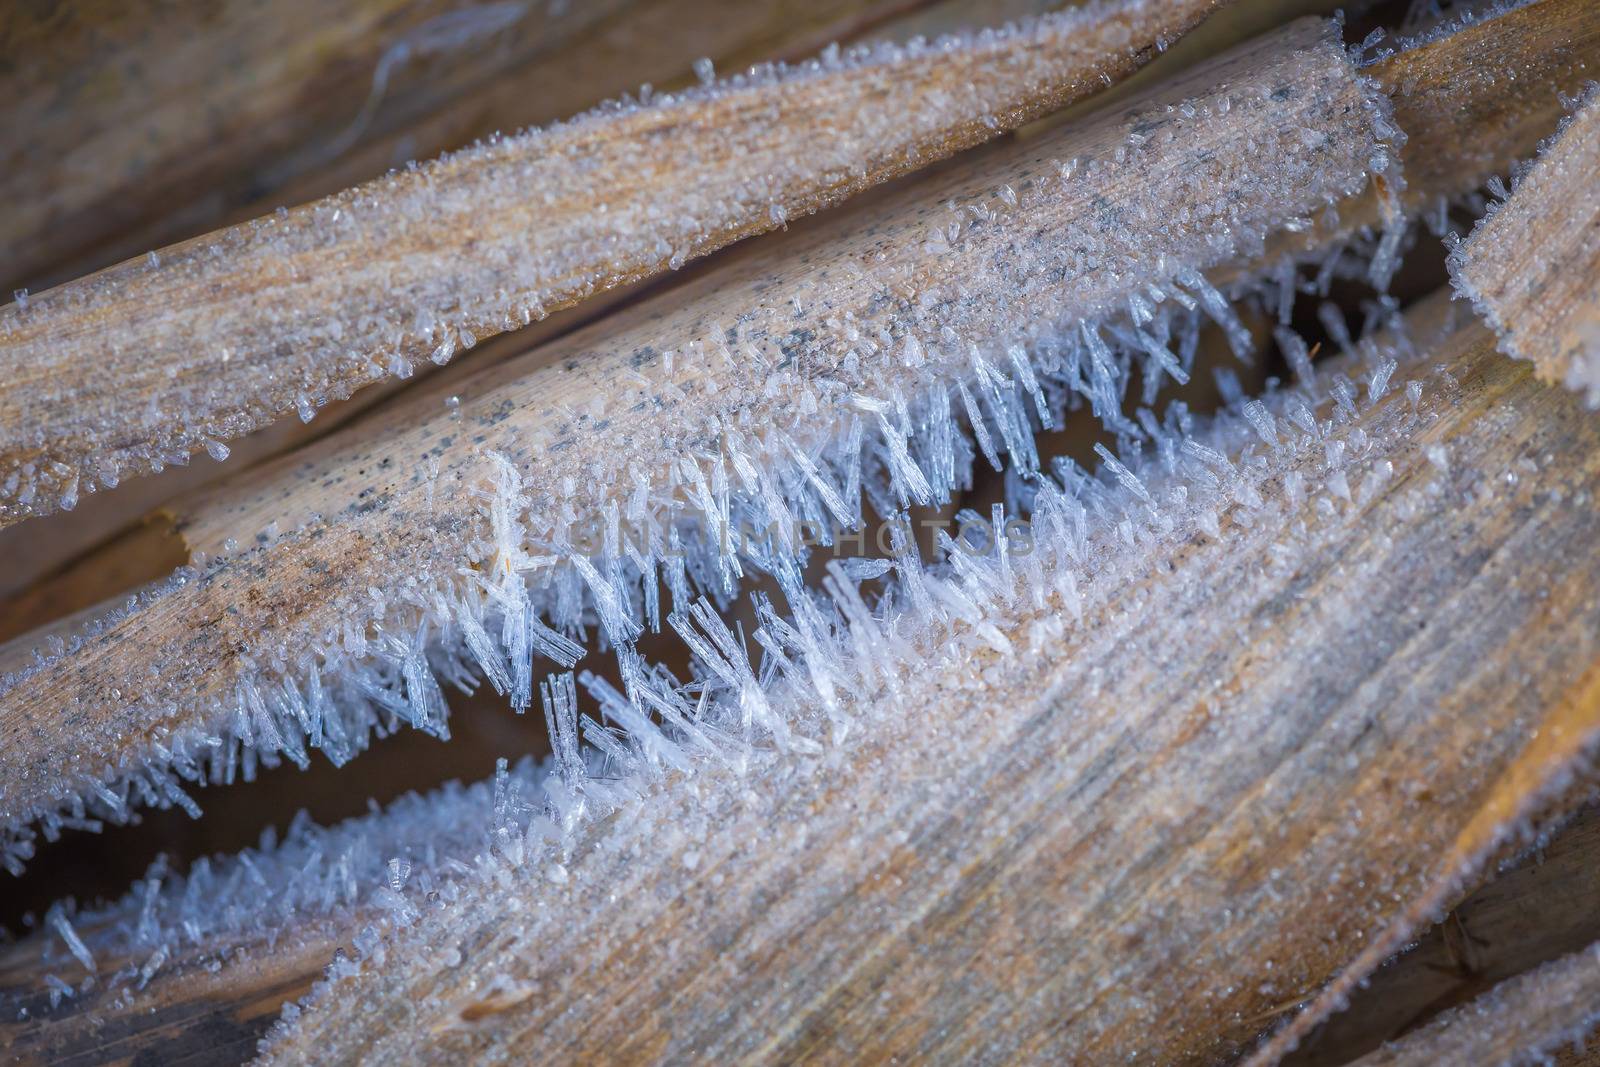 Texture background, pattern. Ice crystals detail on the sprigs of grass. Deposit of small white ice crystals formed on the ground or other surfaces when the temperature falls below freezing.